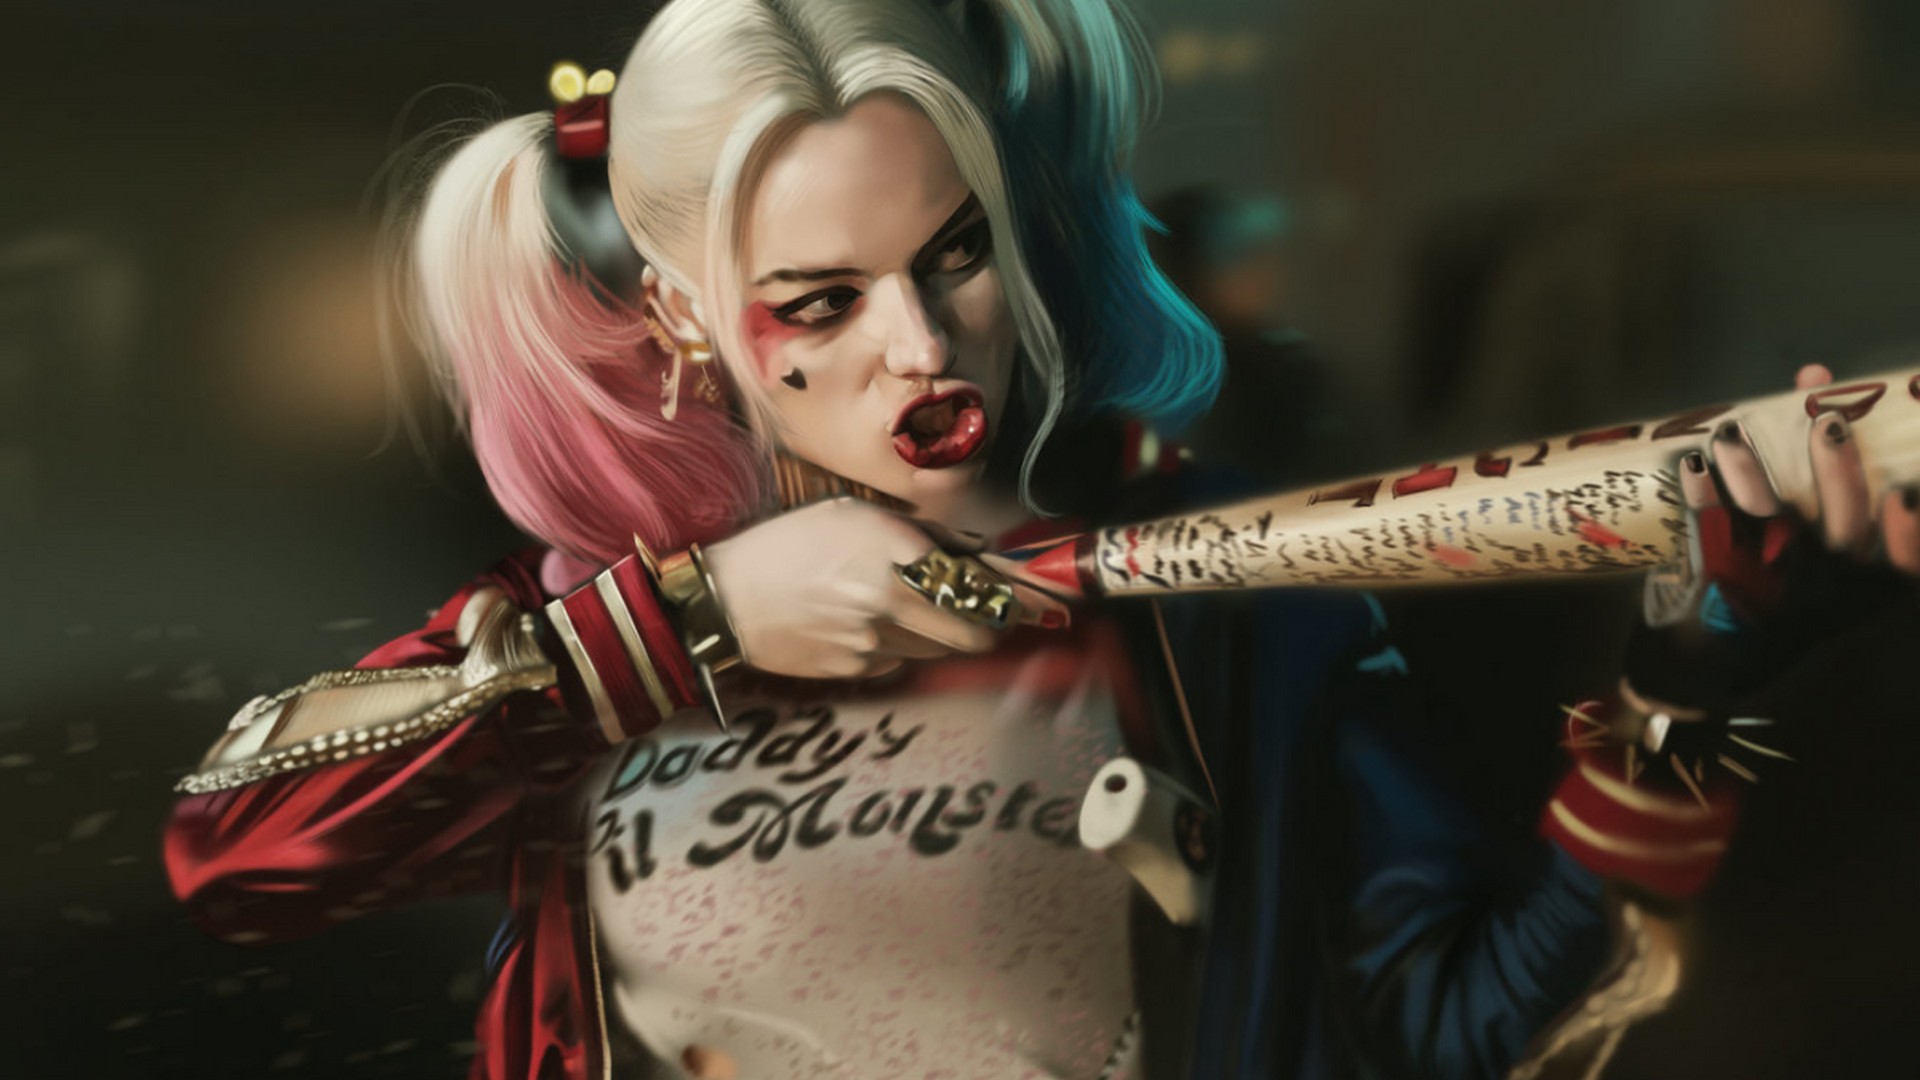 Best Harley Quinn Movie Wallpaper with image resolution 1920x1080 pixel. You can use this wallpaper as background for your desktop Computer Screensavers, Android or iPhone smartphones